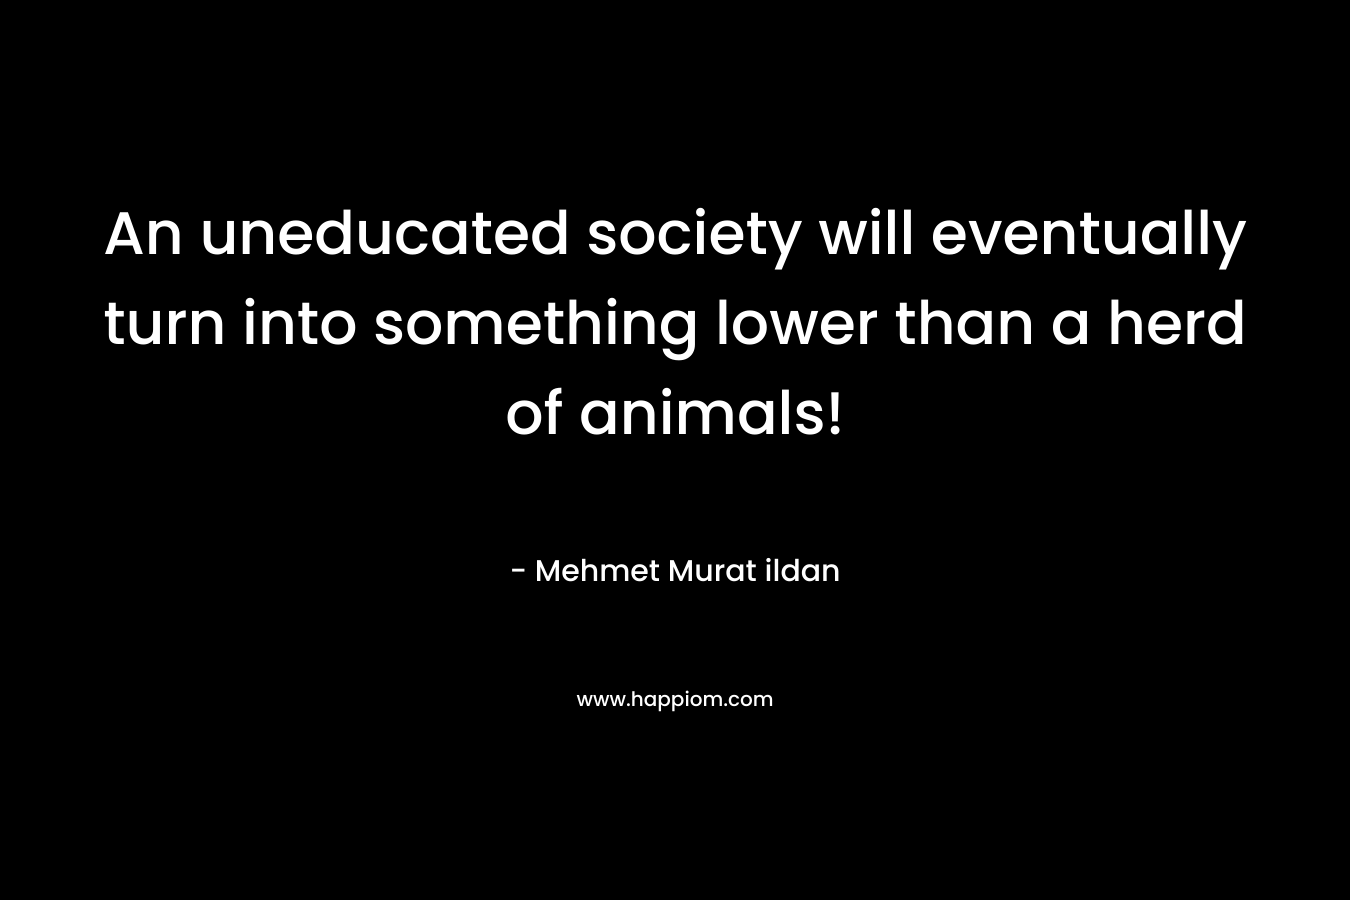 An uneducated society will eventually turn into something lower than a herd of animals! – Mehmet Murat ildan